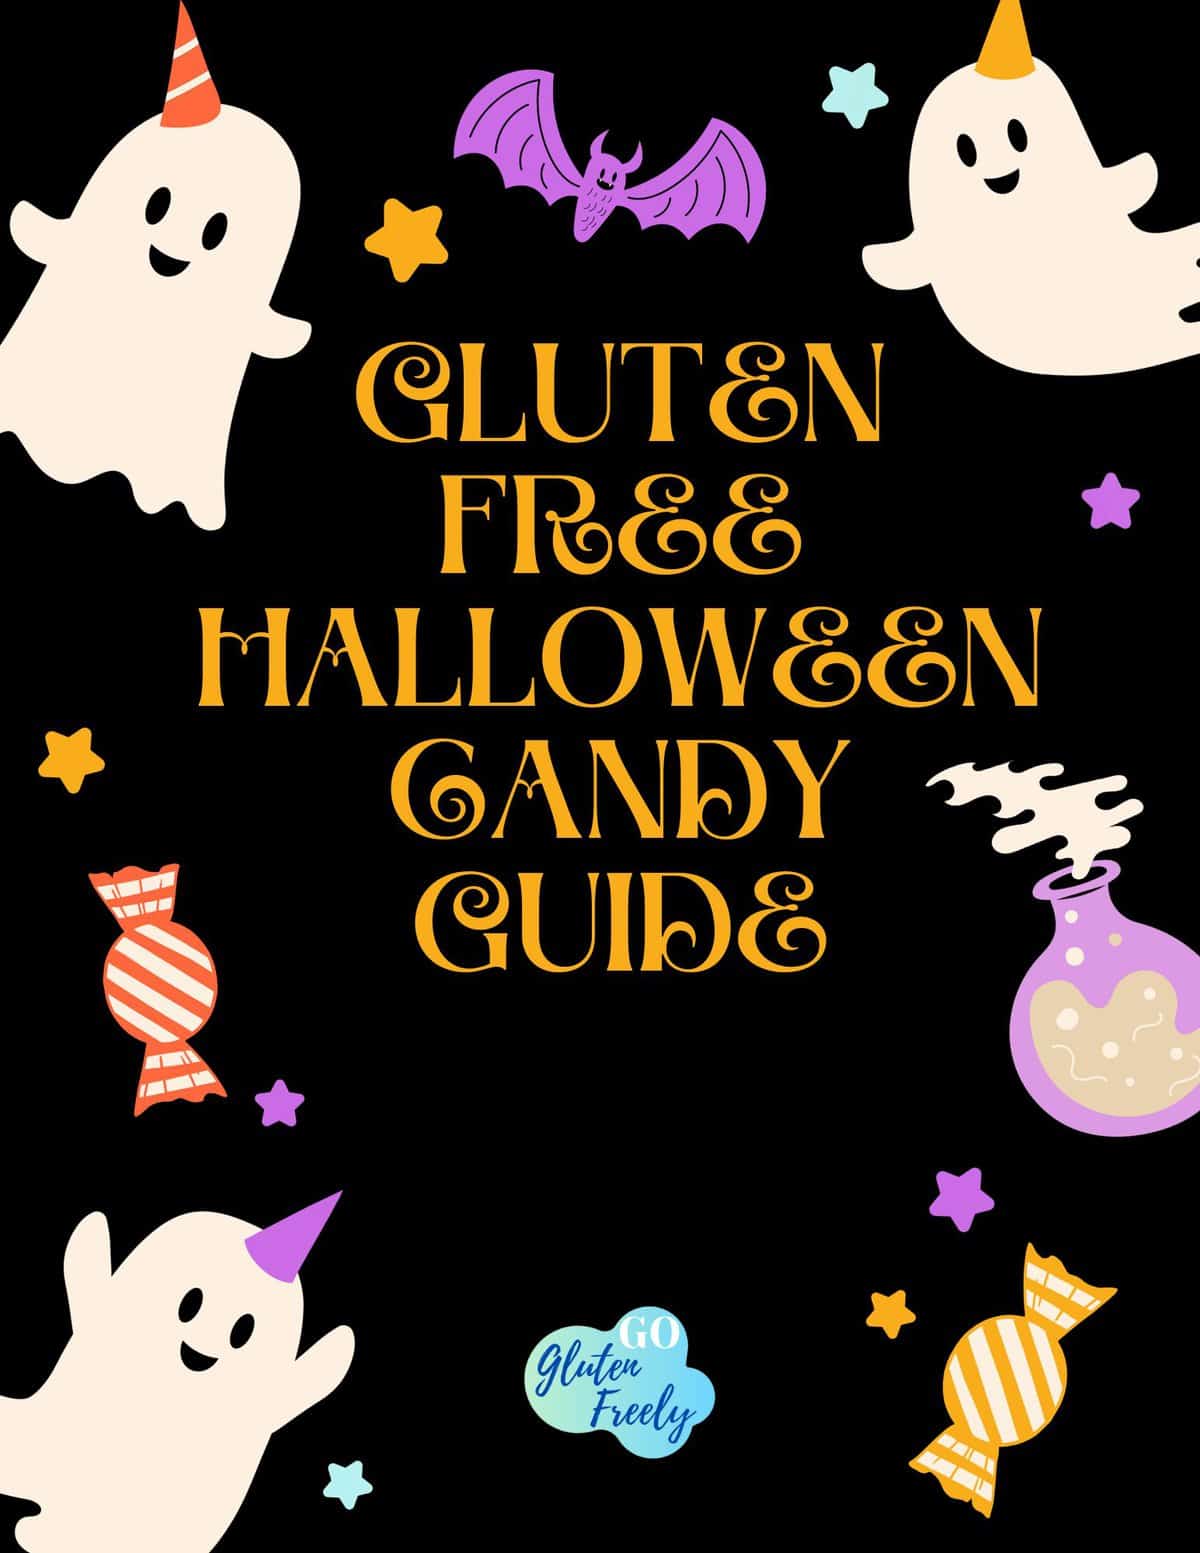 Candy corn background with black text in a transparent white box: "Gluten free Halloween Candy. goglutenfreely.com"